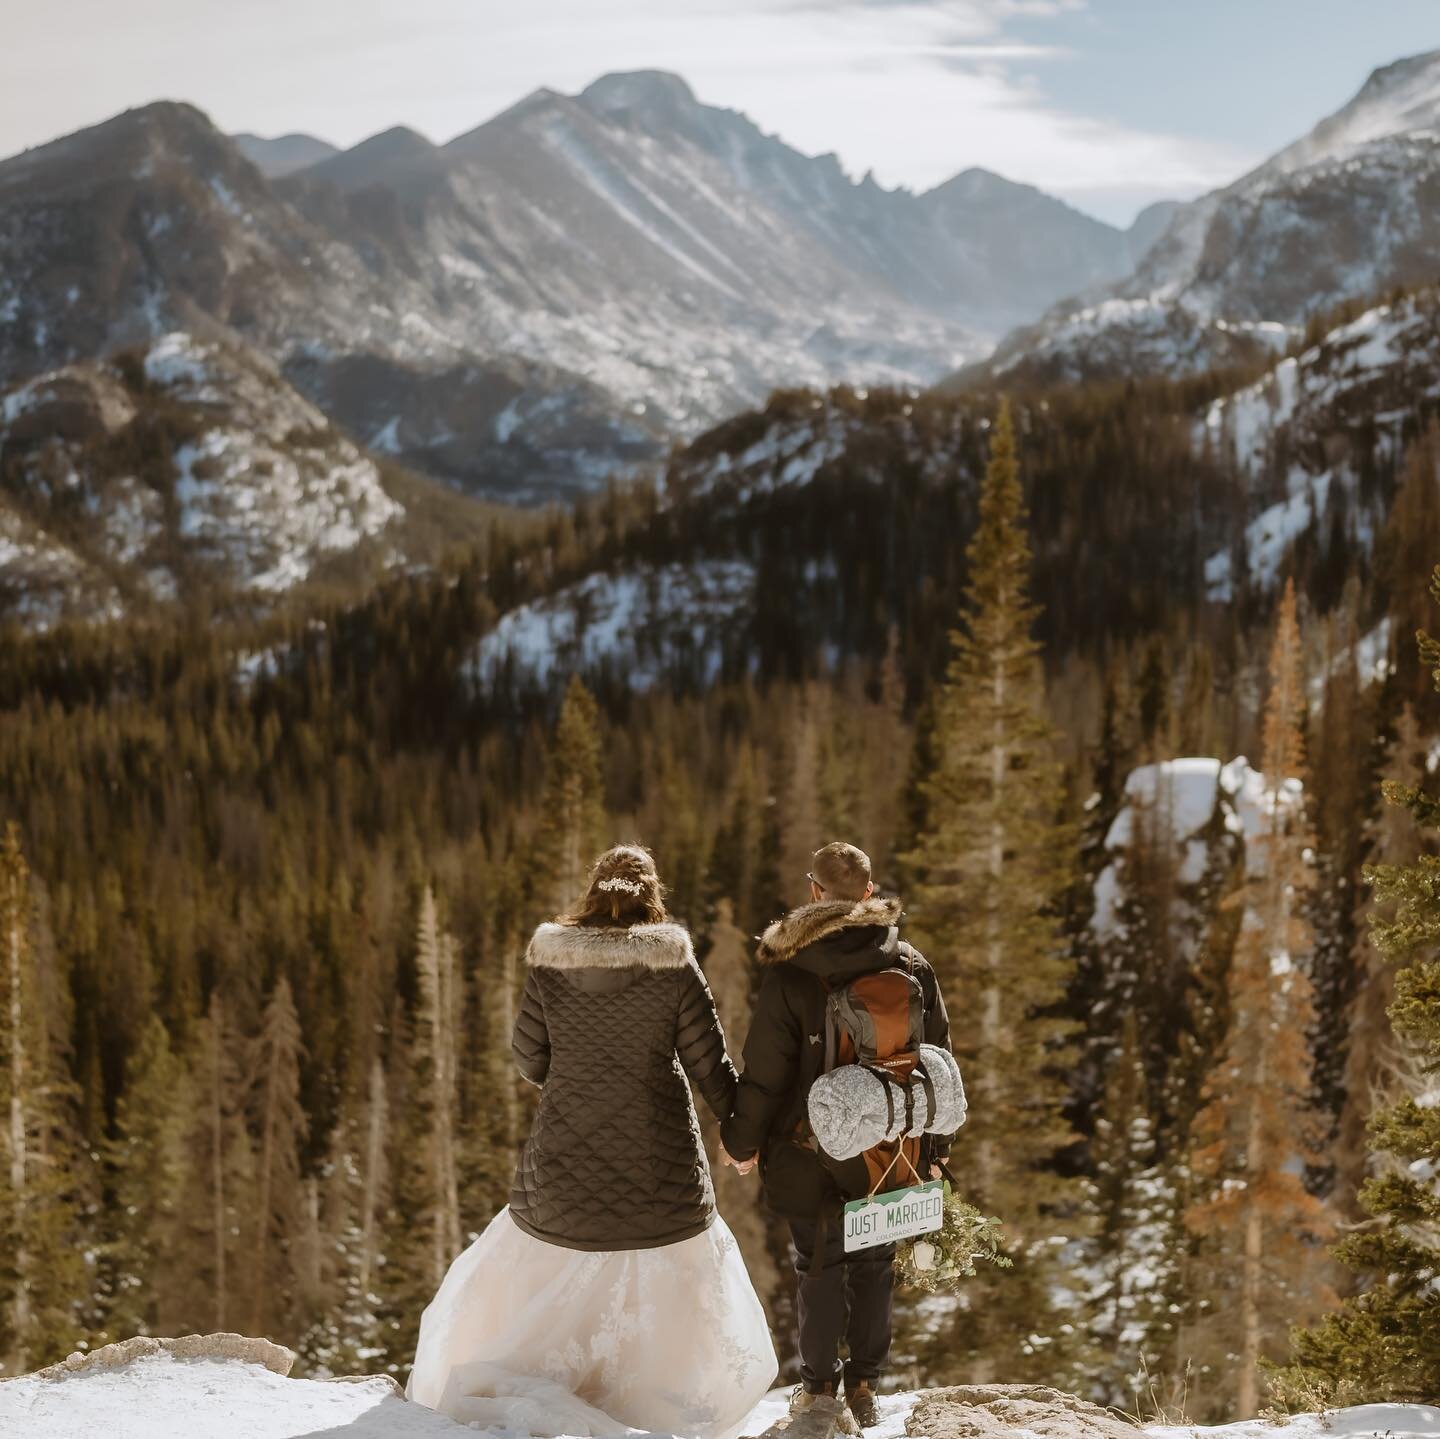 &ldquo;Nothings perfect&rdquo; or whatever they say, but this elopement is about as close as it gets. 

Amanda+ Matthew ❤️ 
 
The two hosted an intimate ceremony in Rocky Mountain National Park before embarking on a winter hike, spikes and all to get